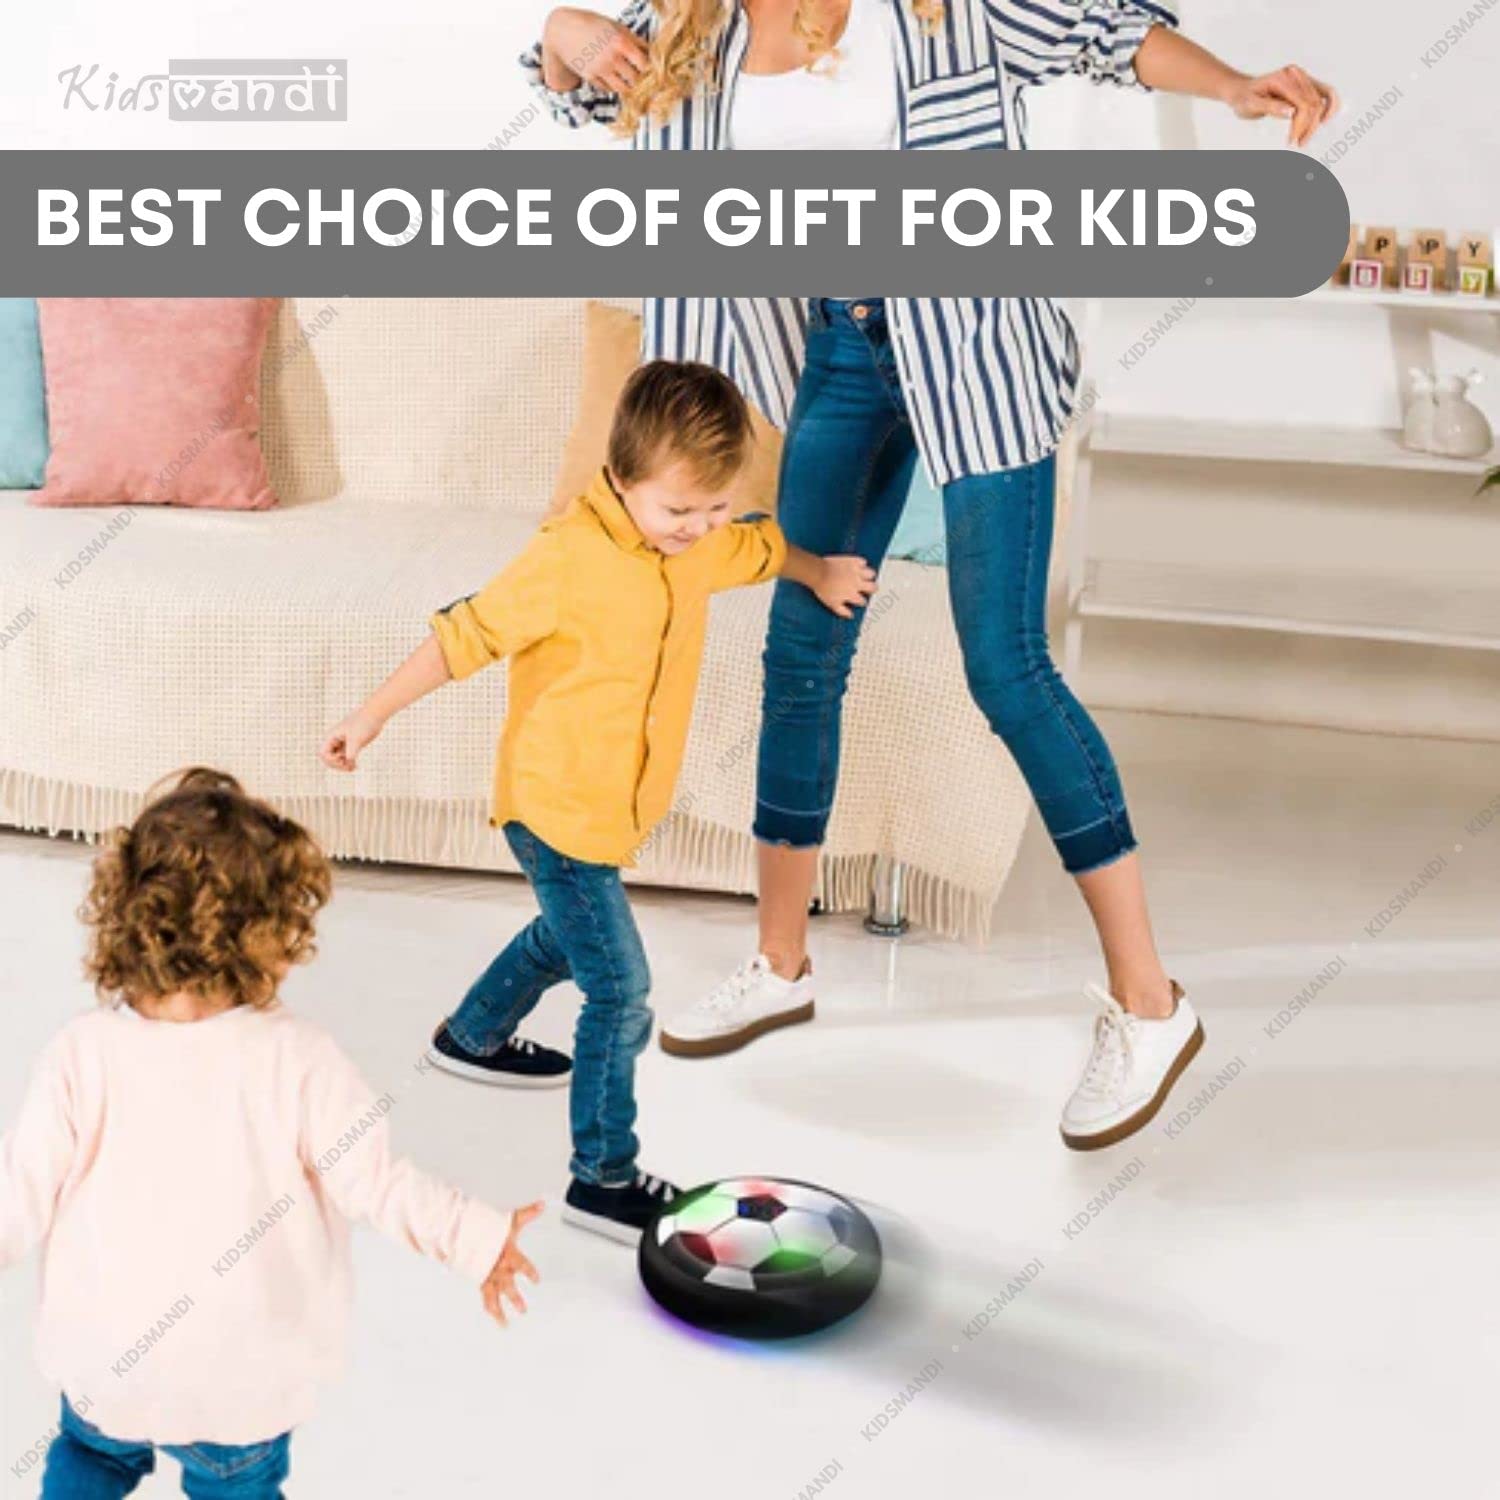 Kids Mandi LED Hover Ball - Perfect Indoor Football for Kids